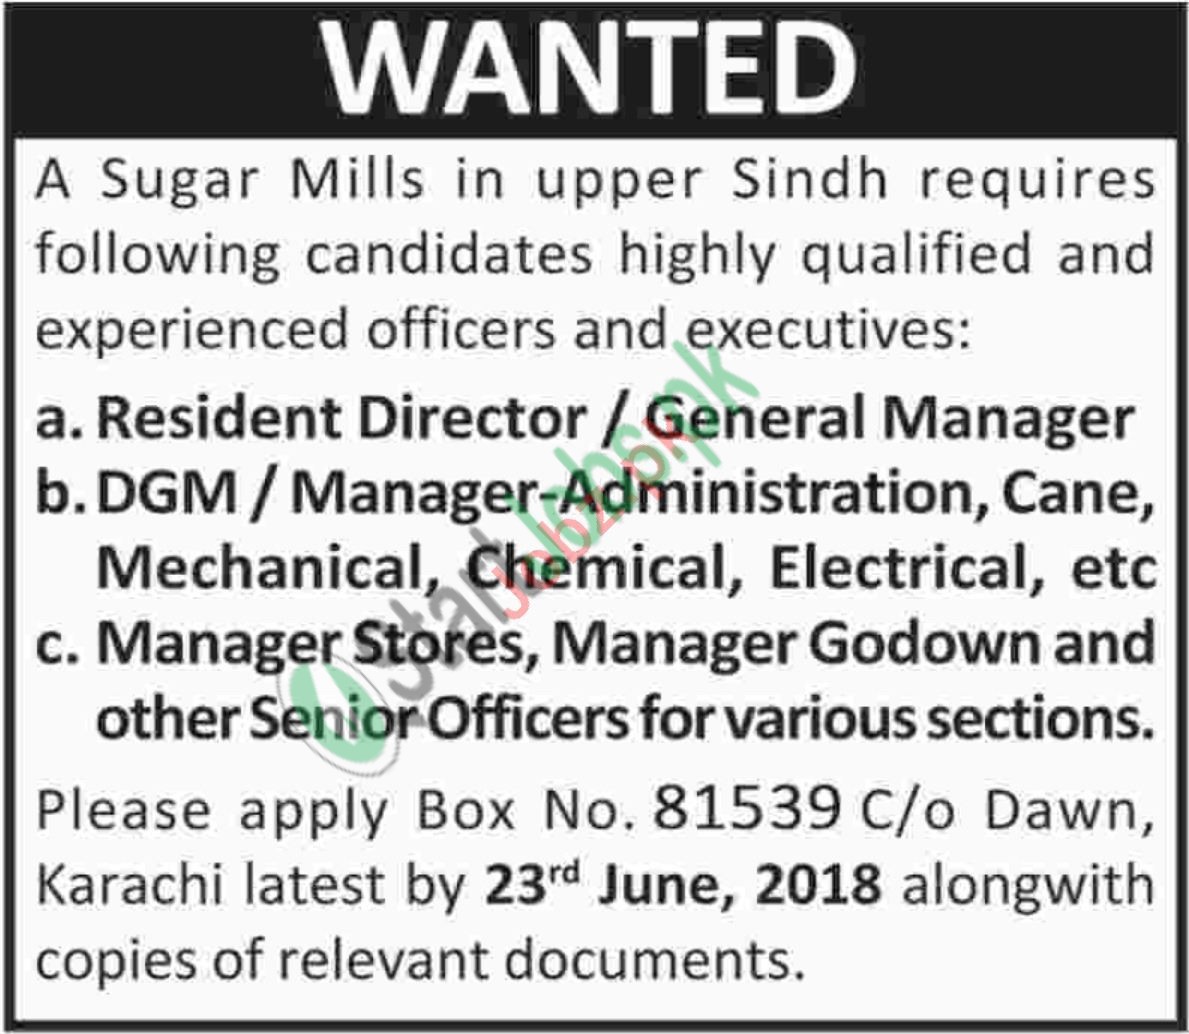 Sugar Mills in Upper Sindh Jobs For Resident Director, Manager Administration & Others